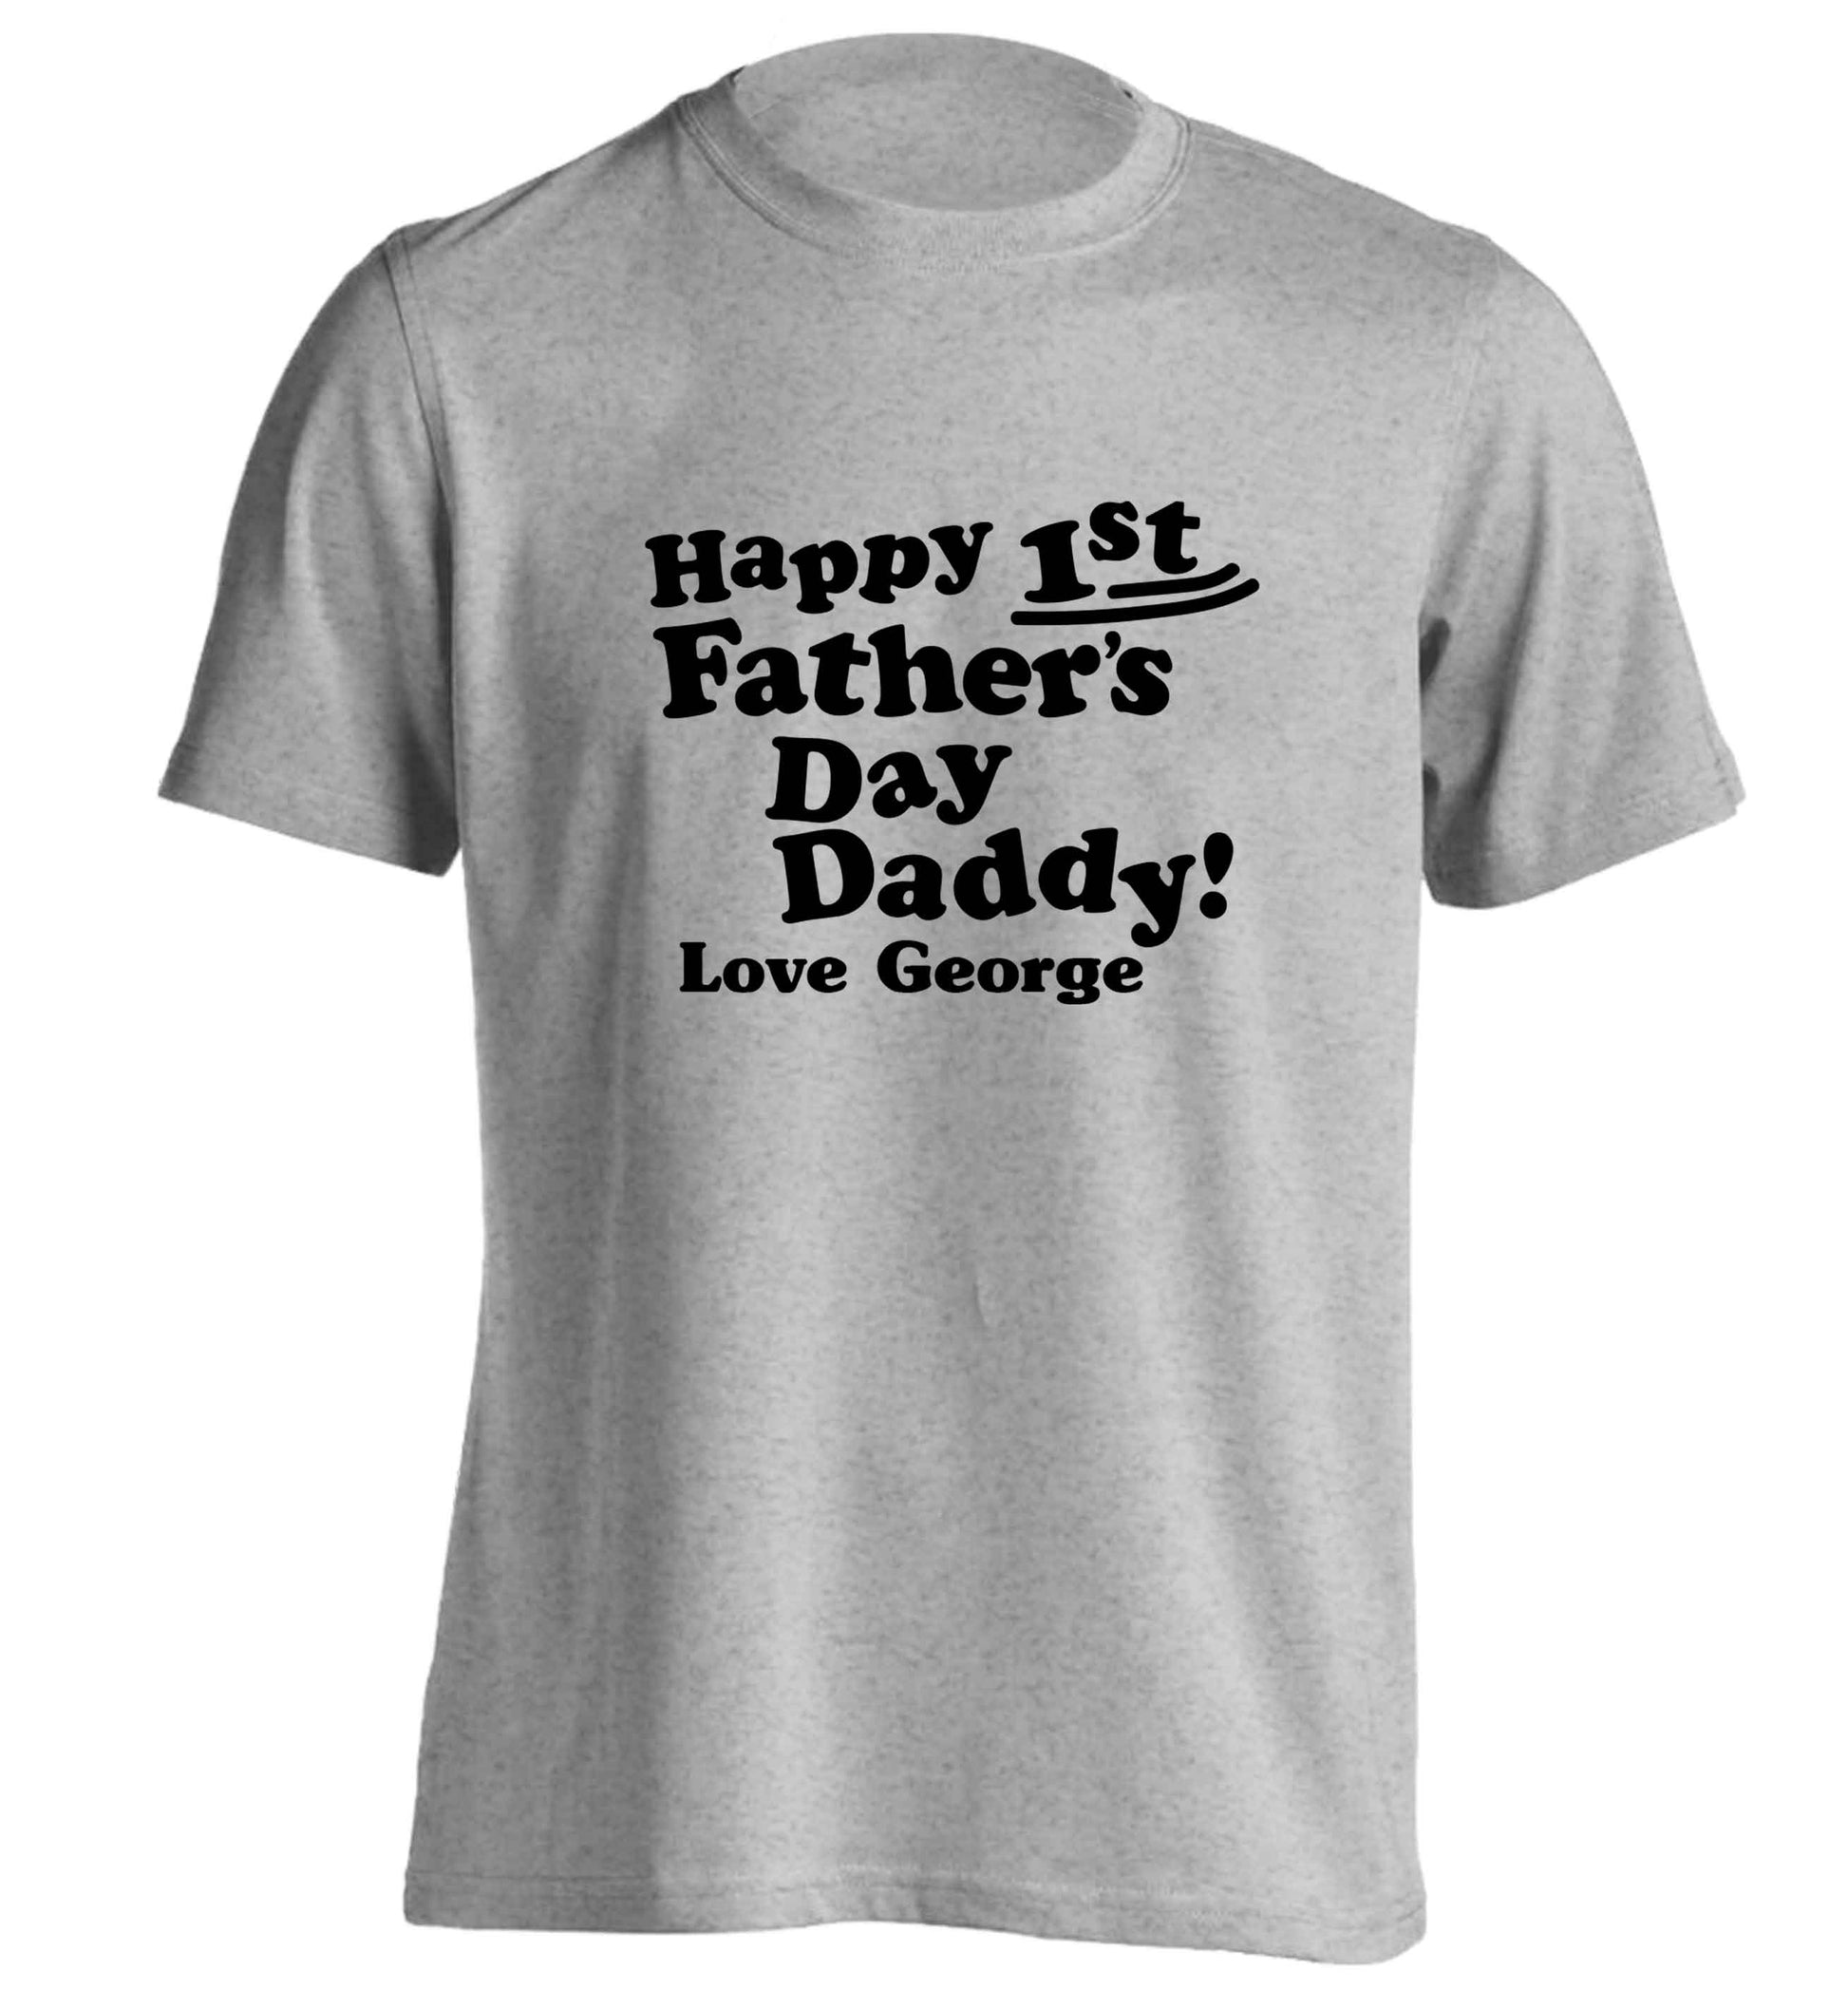 Happy first Fathers Day daddy love personalised adults unisex grey Tshirt 2XL